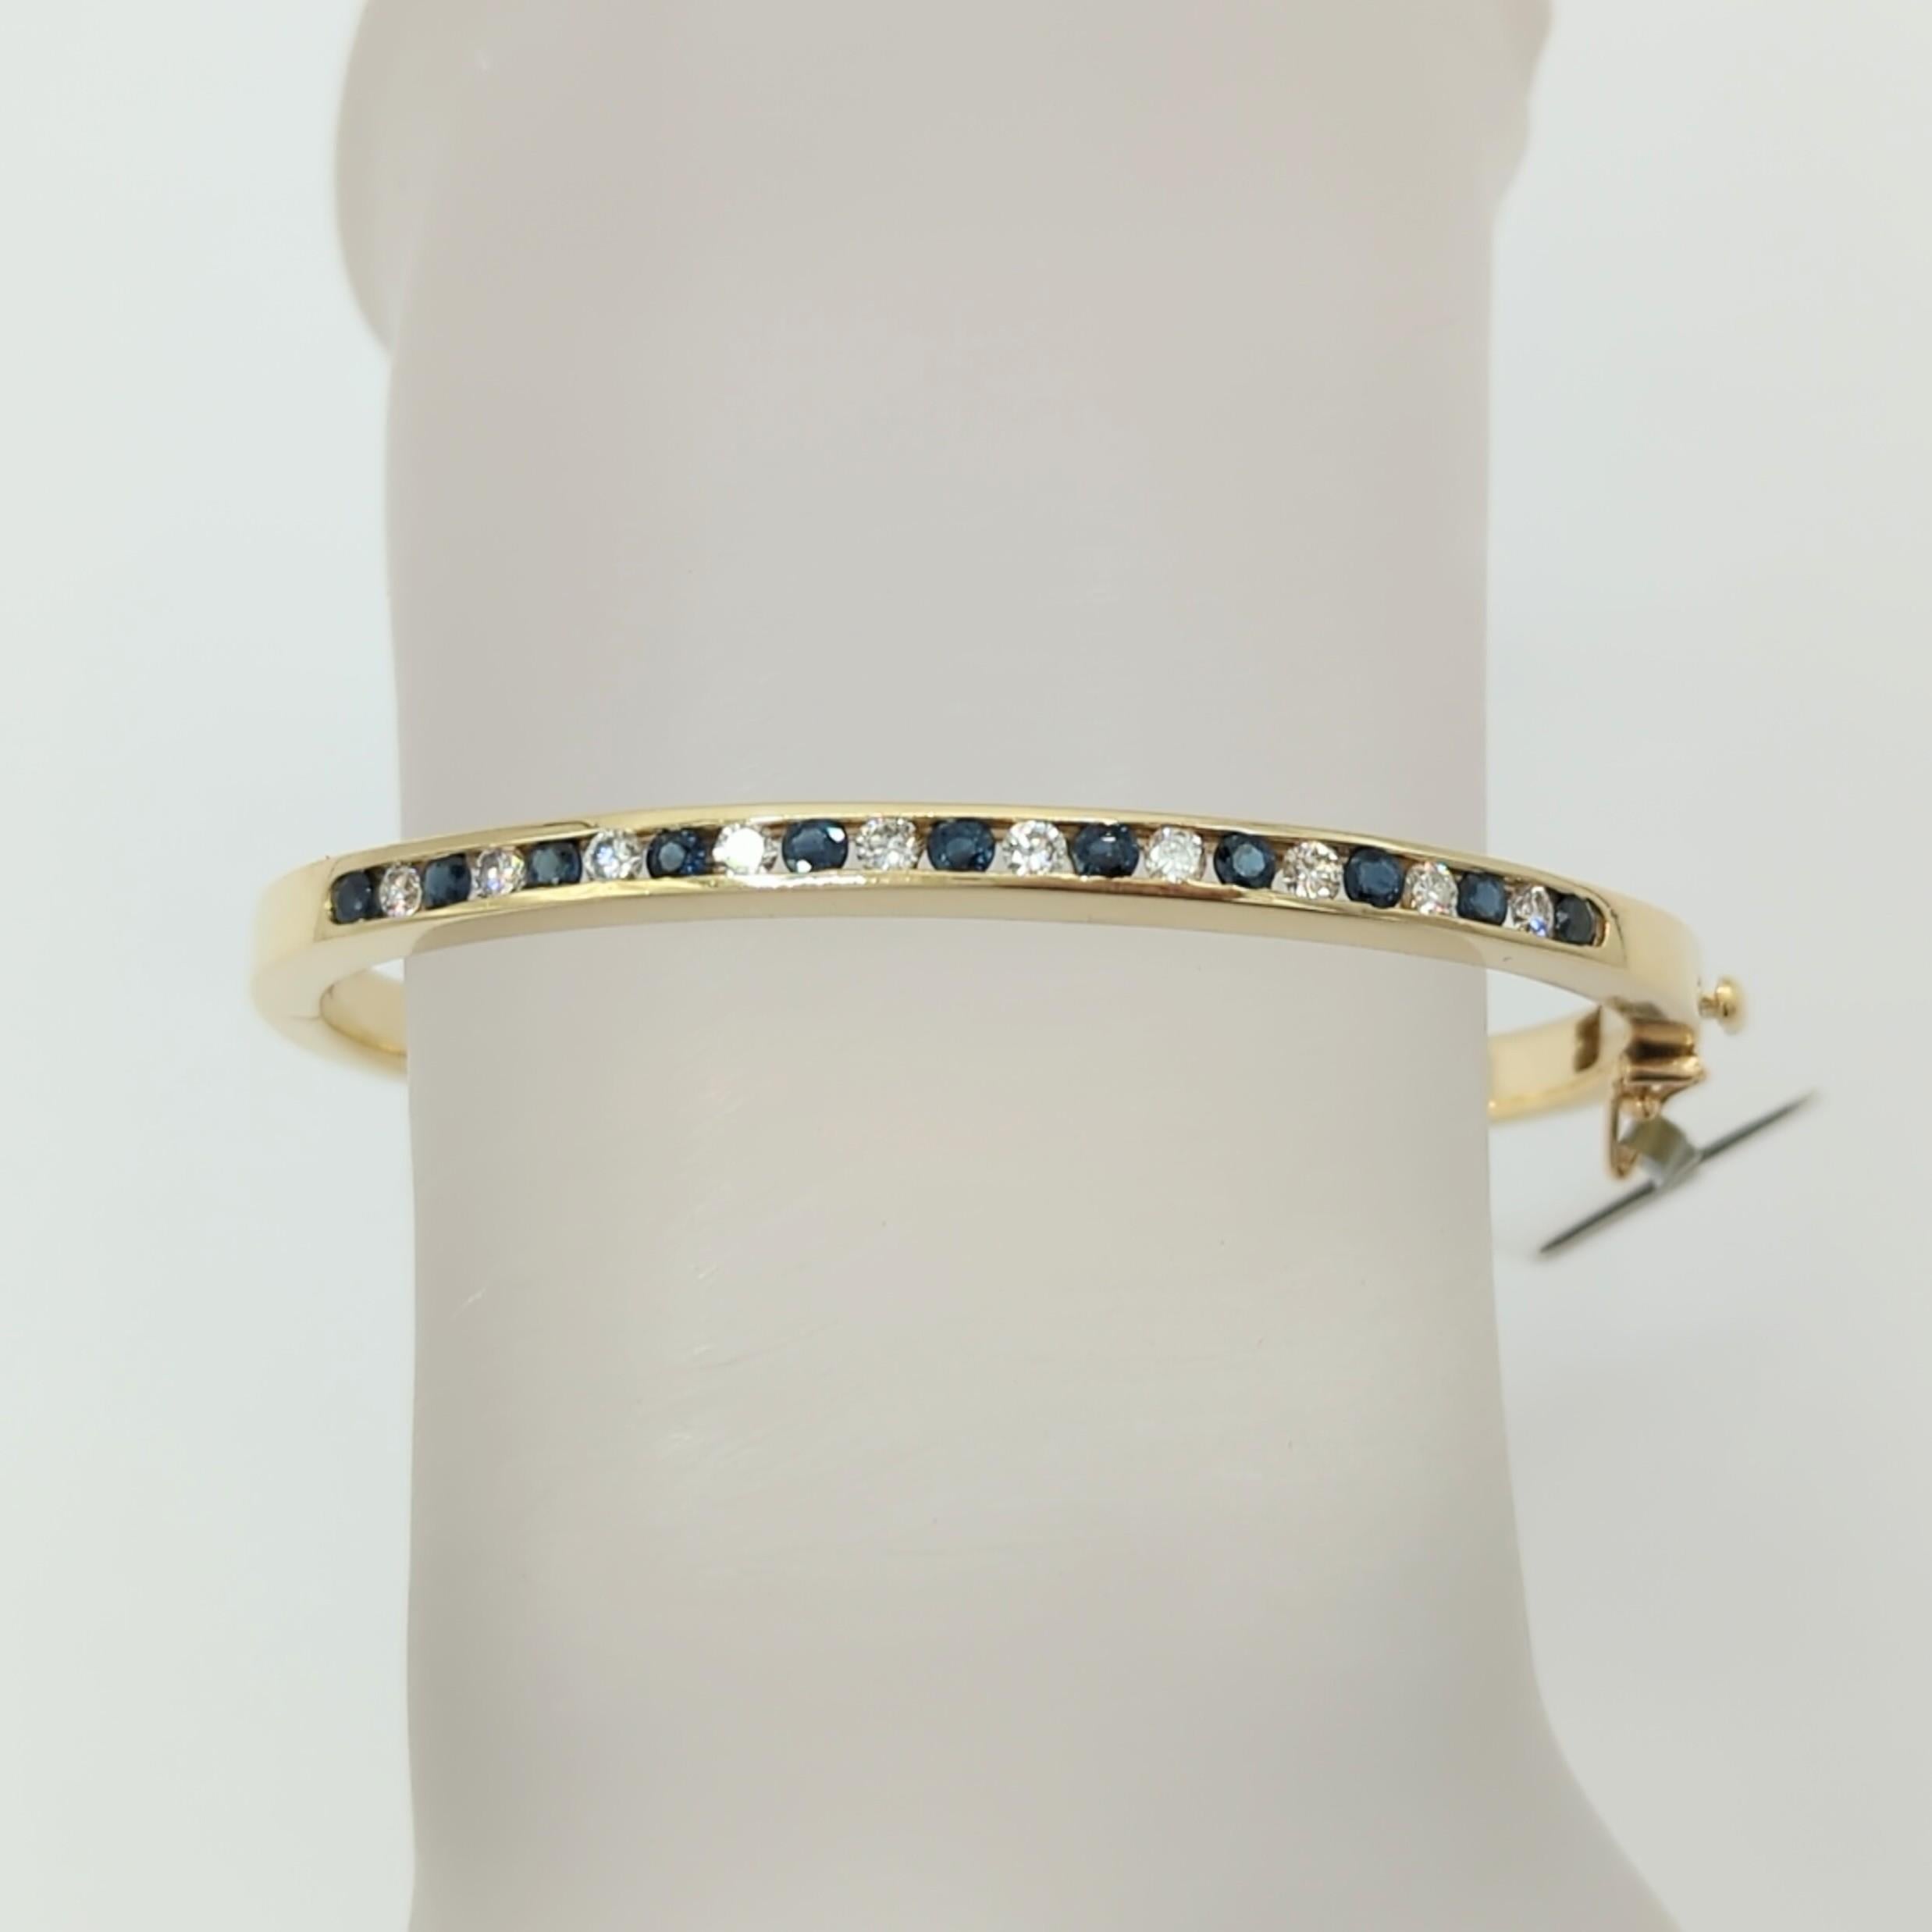 Beautiful bangle with good quality white diamond rounds and blue sapphire rounds.  Handmade in 14k yellow gold.  Perfect to stack or wear on it's own.